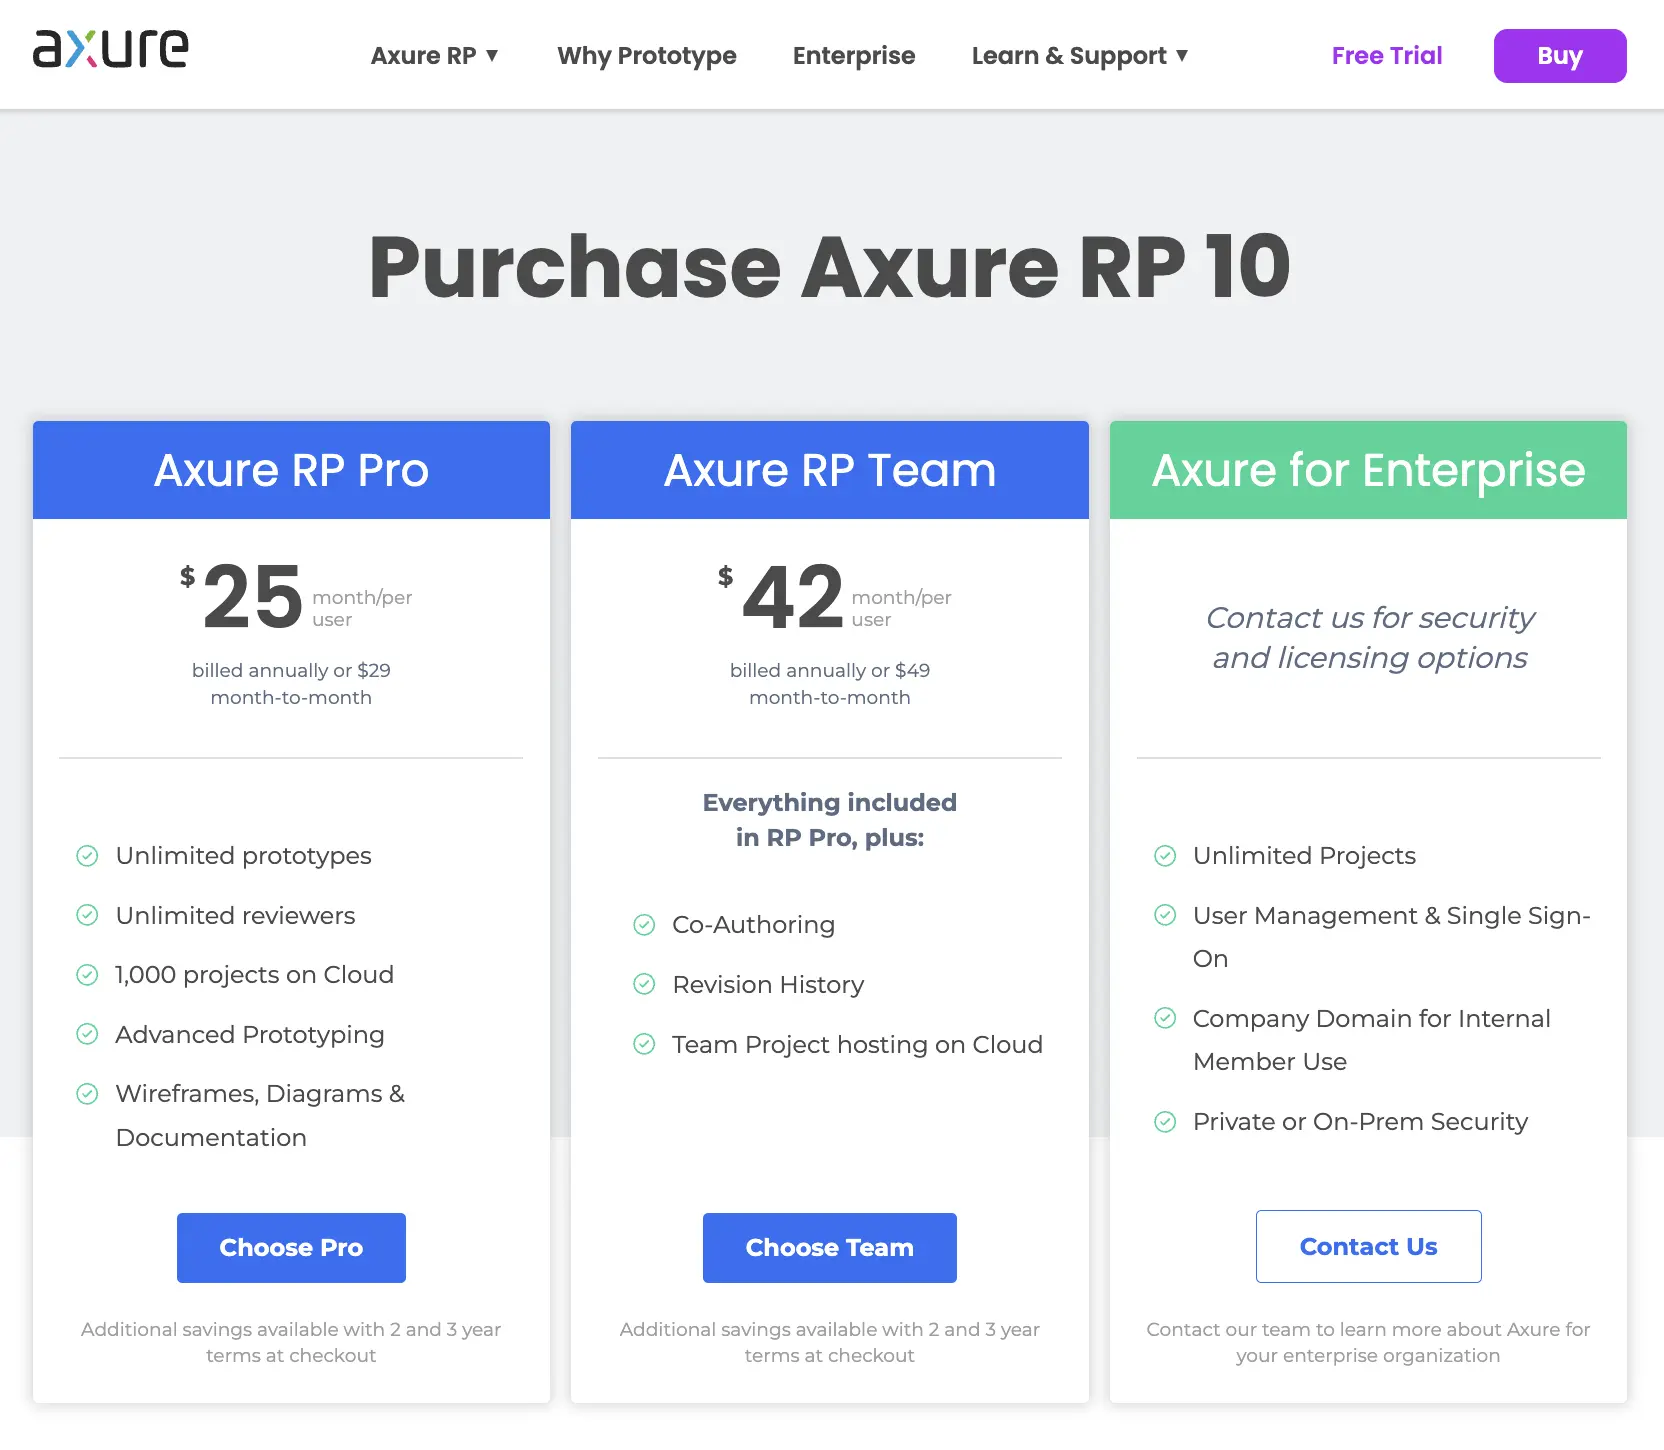  How Much Does Axure RP Cost?